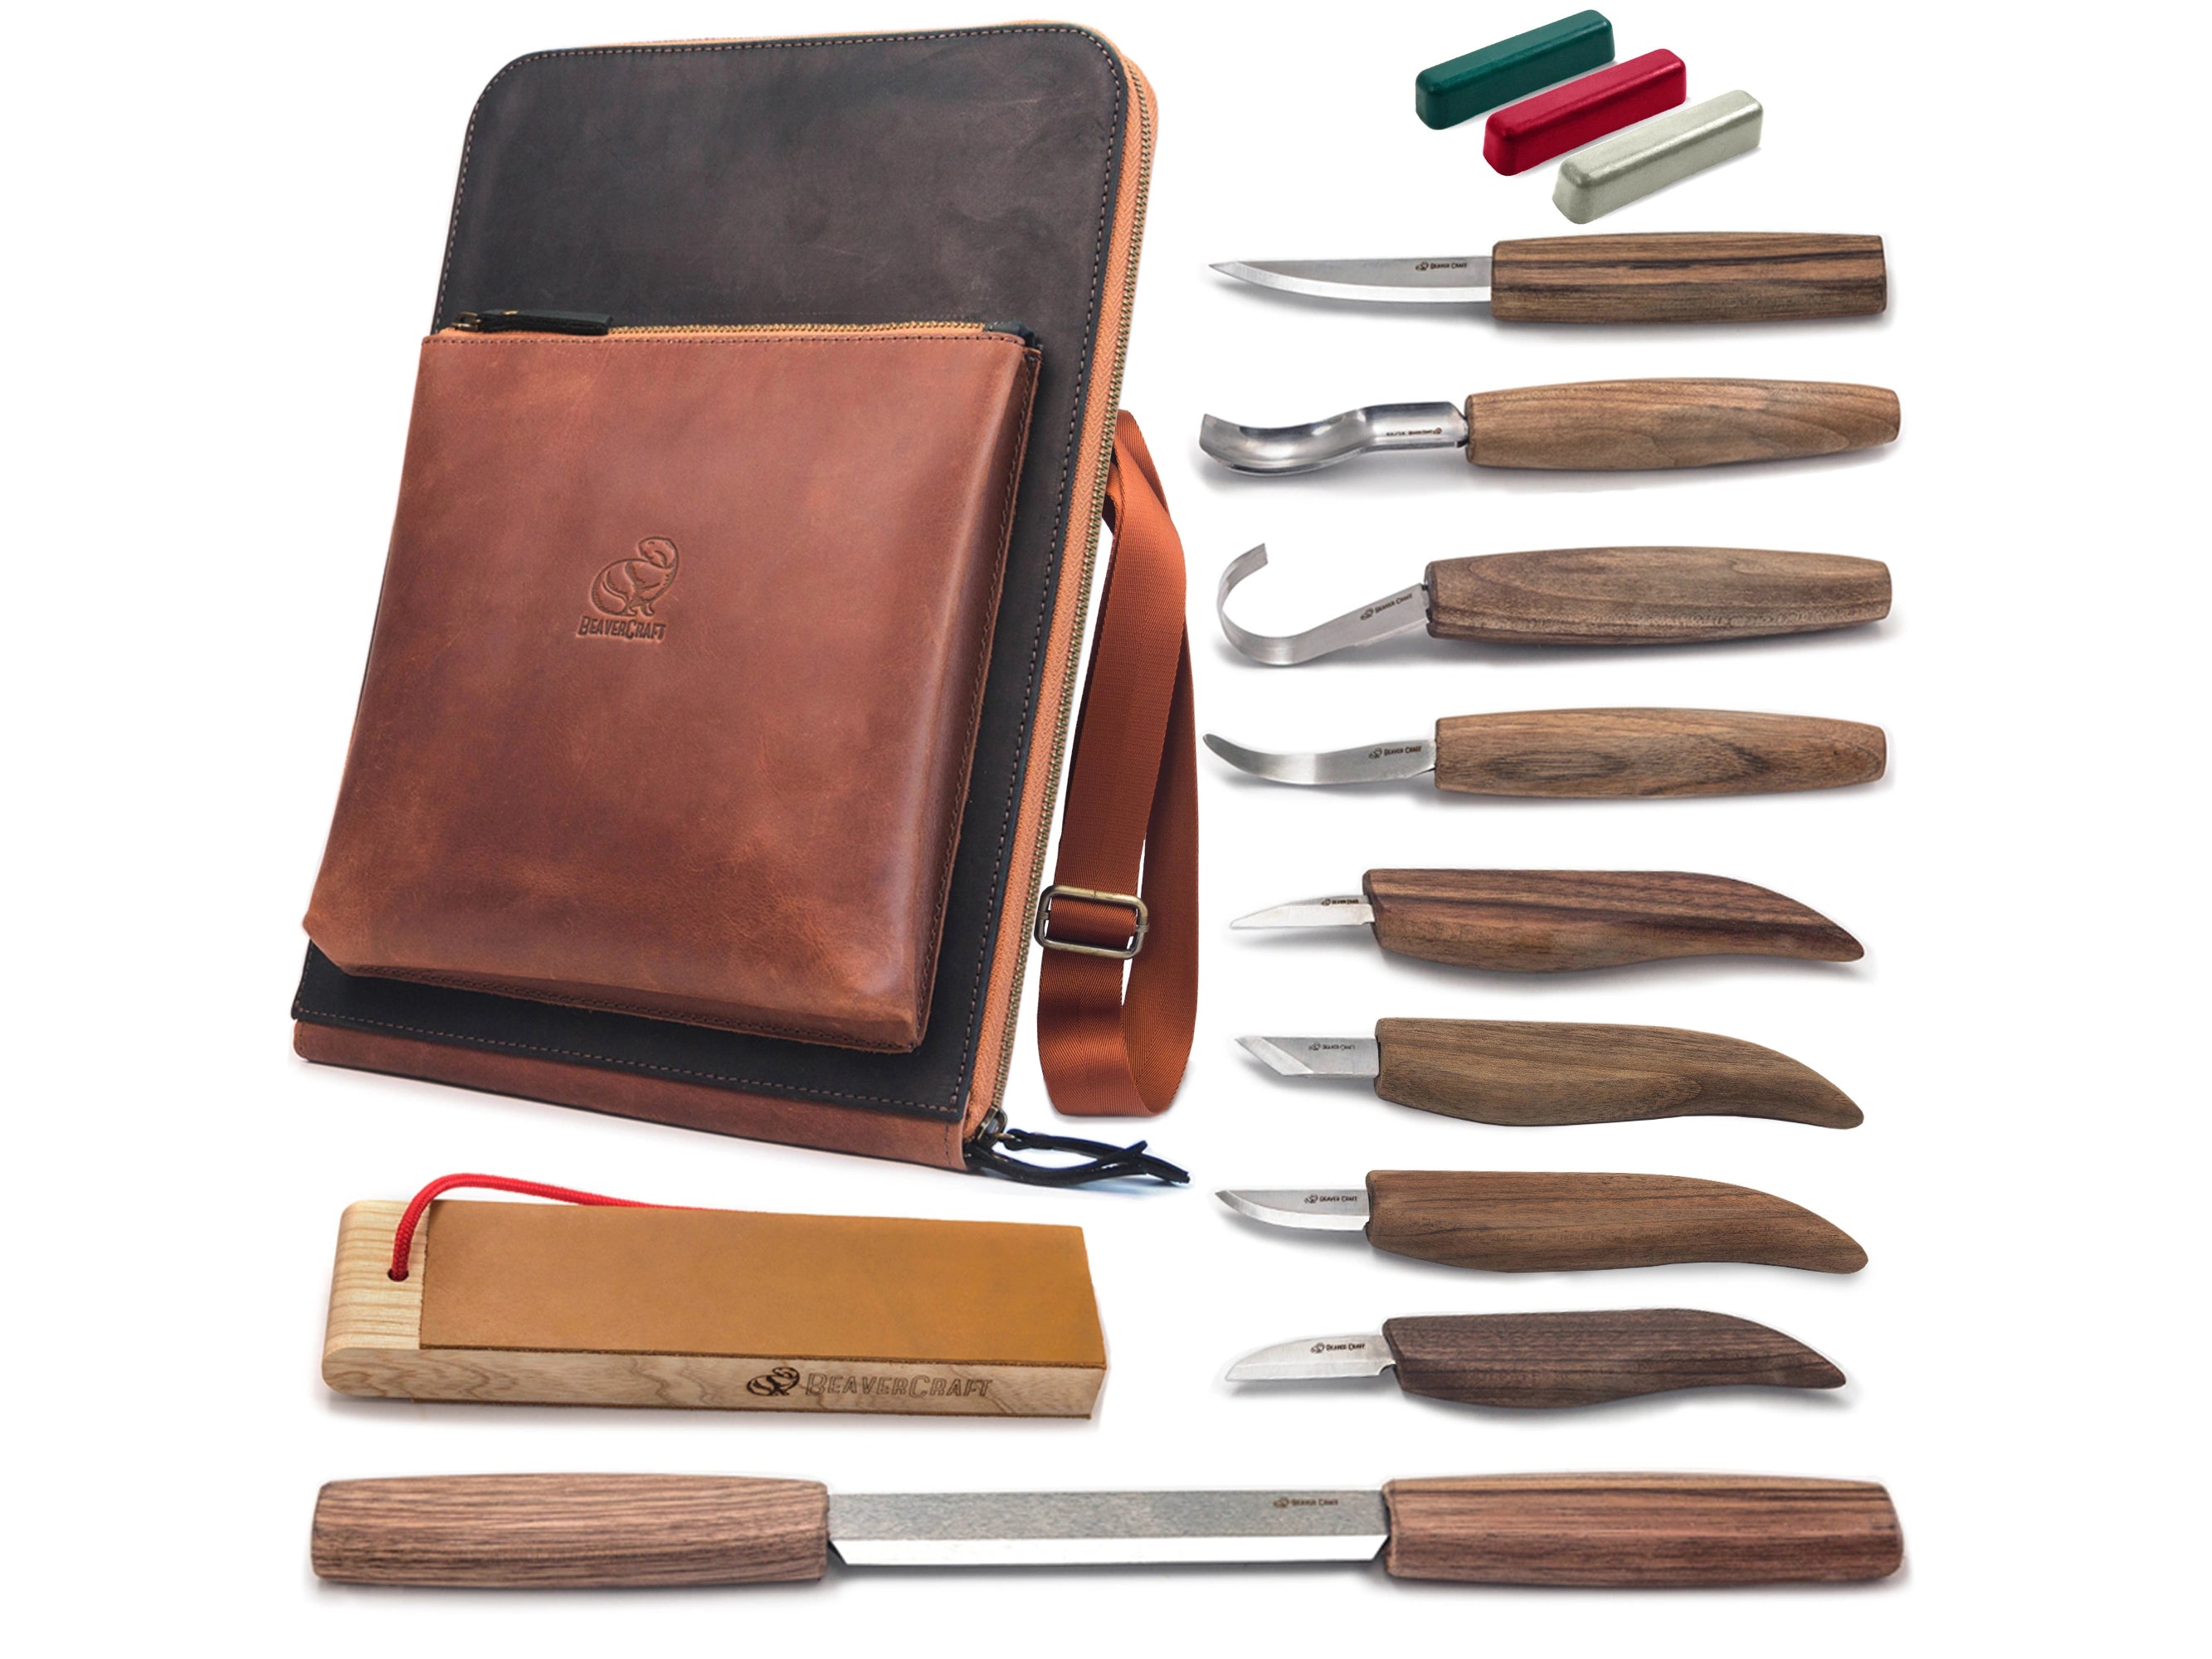 BeaverCraft Deluxe Wood Carving Tools Kit S19x - Wood Carving Knife Whittling Kit Wood Carving Whittling Knife Set with Leather Strop and Polishing